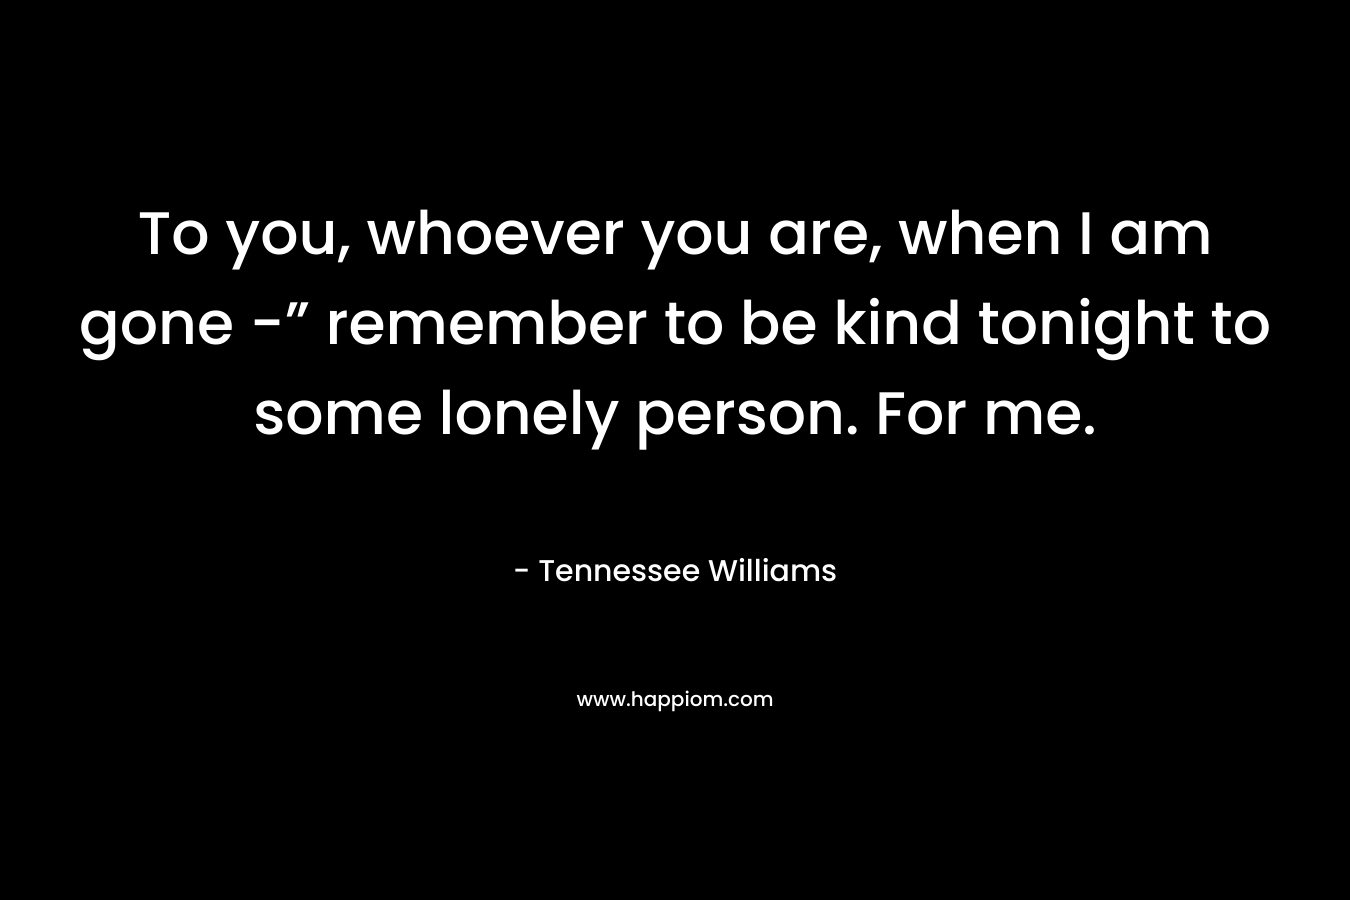 To you, whoever you are, when I am gone -” remember to be kind tonight to some lonely person. For me.